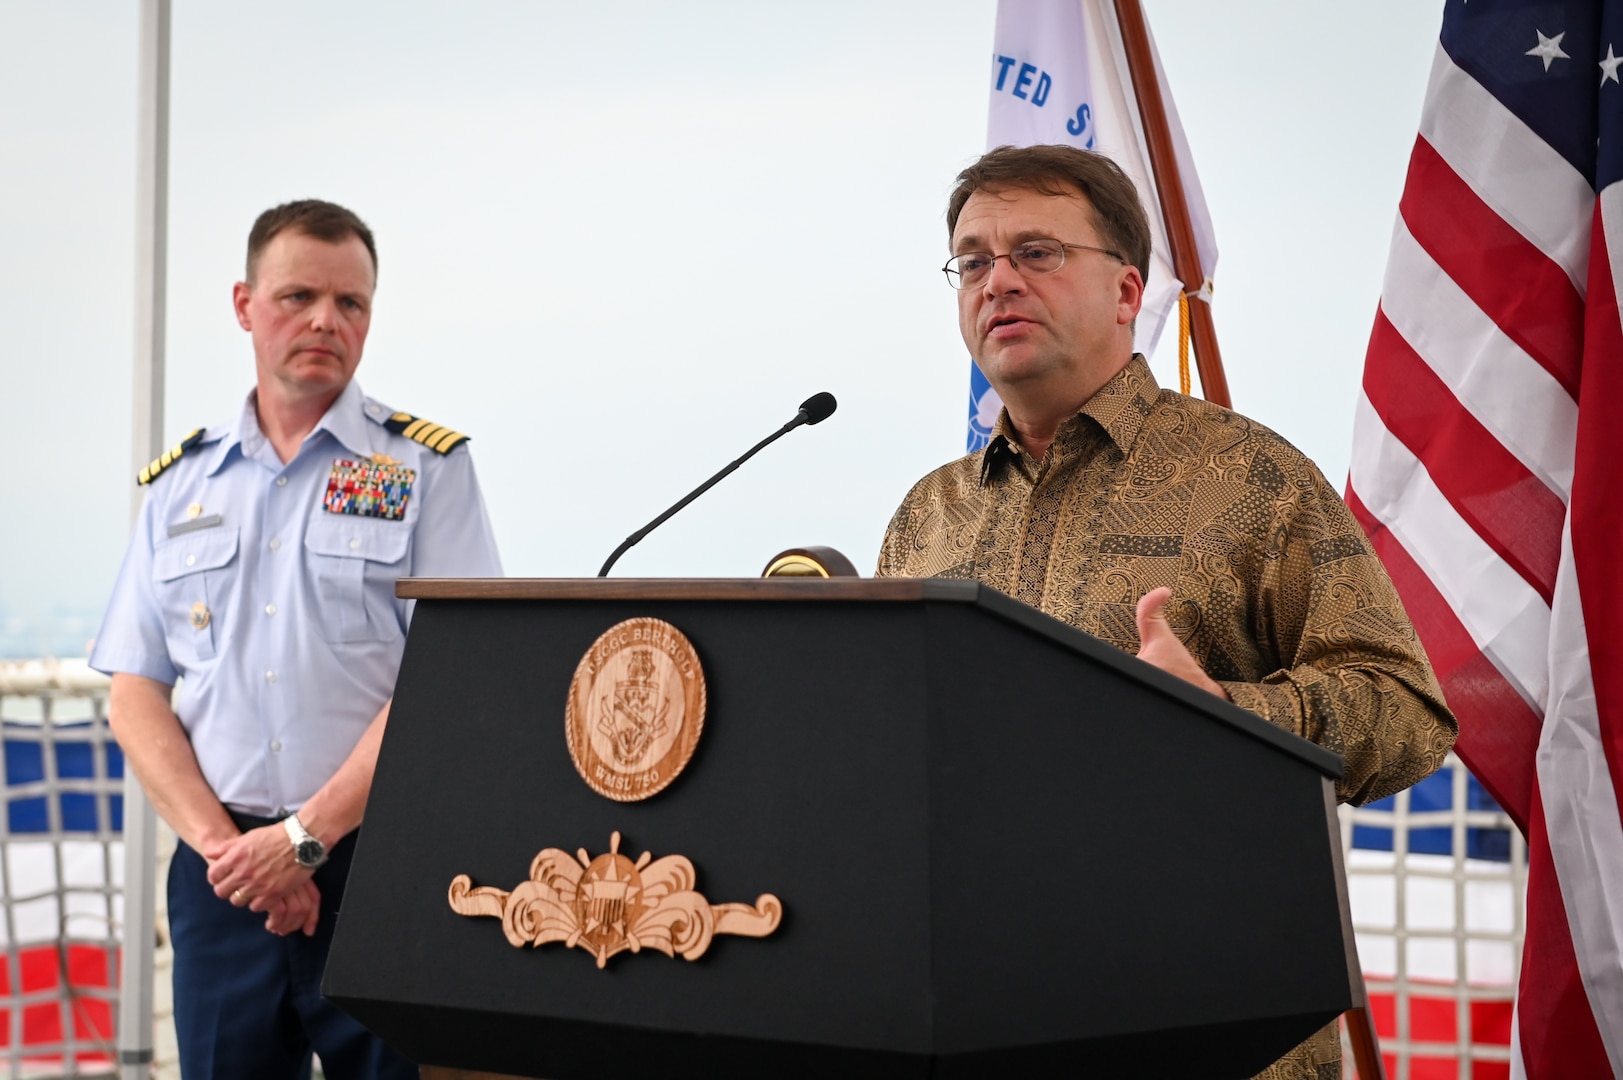 Edgard D. Kagan, U.S. Ambassador-designate to Malaysia, speaks to the crowd aboard U.S. Coast Guard Cutter Bertholf (WMSL 750) during a U.S. Embassy Reception the crew of the Bertholf hosted while moored at Port Klang, Malaysia, March 2, 2024. The Ambassador has been in office since Dec. 19, 2023. (U.S. Coast Guard photo by Petty Officer Steve Strohmaier)